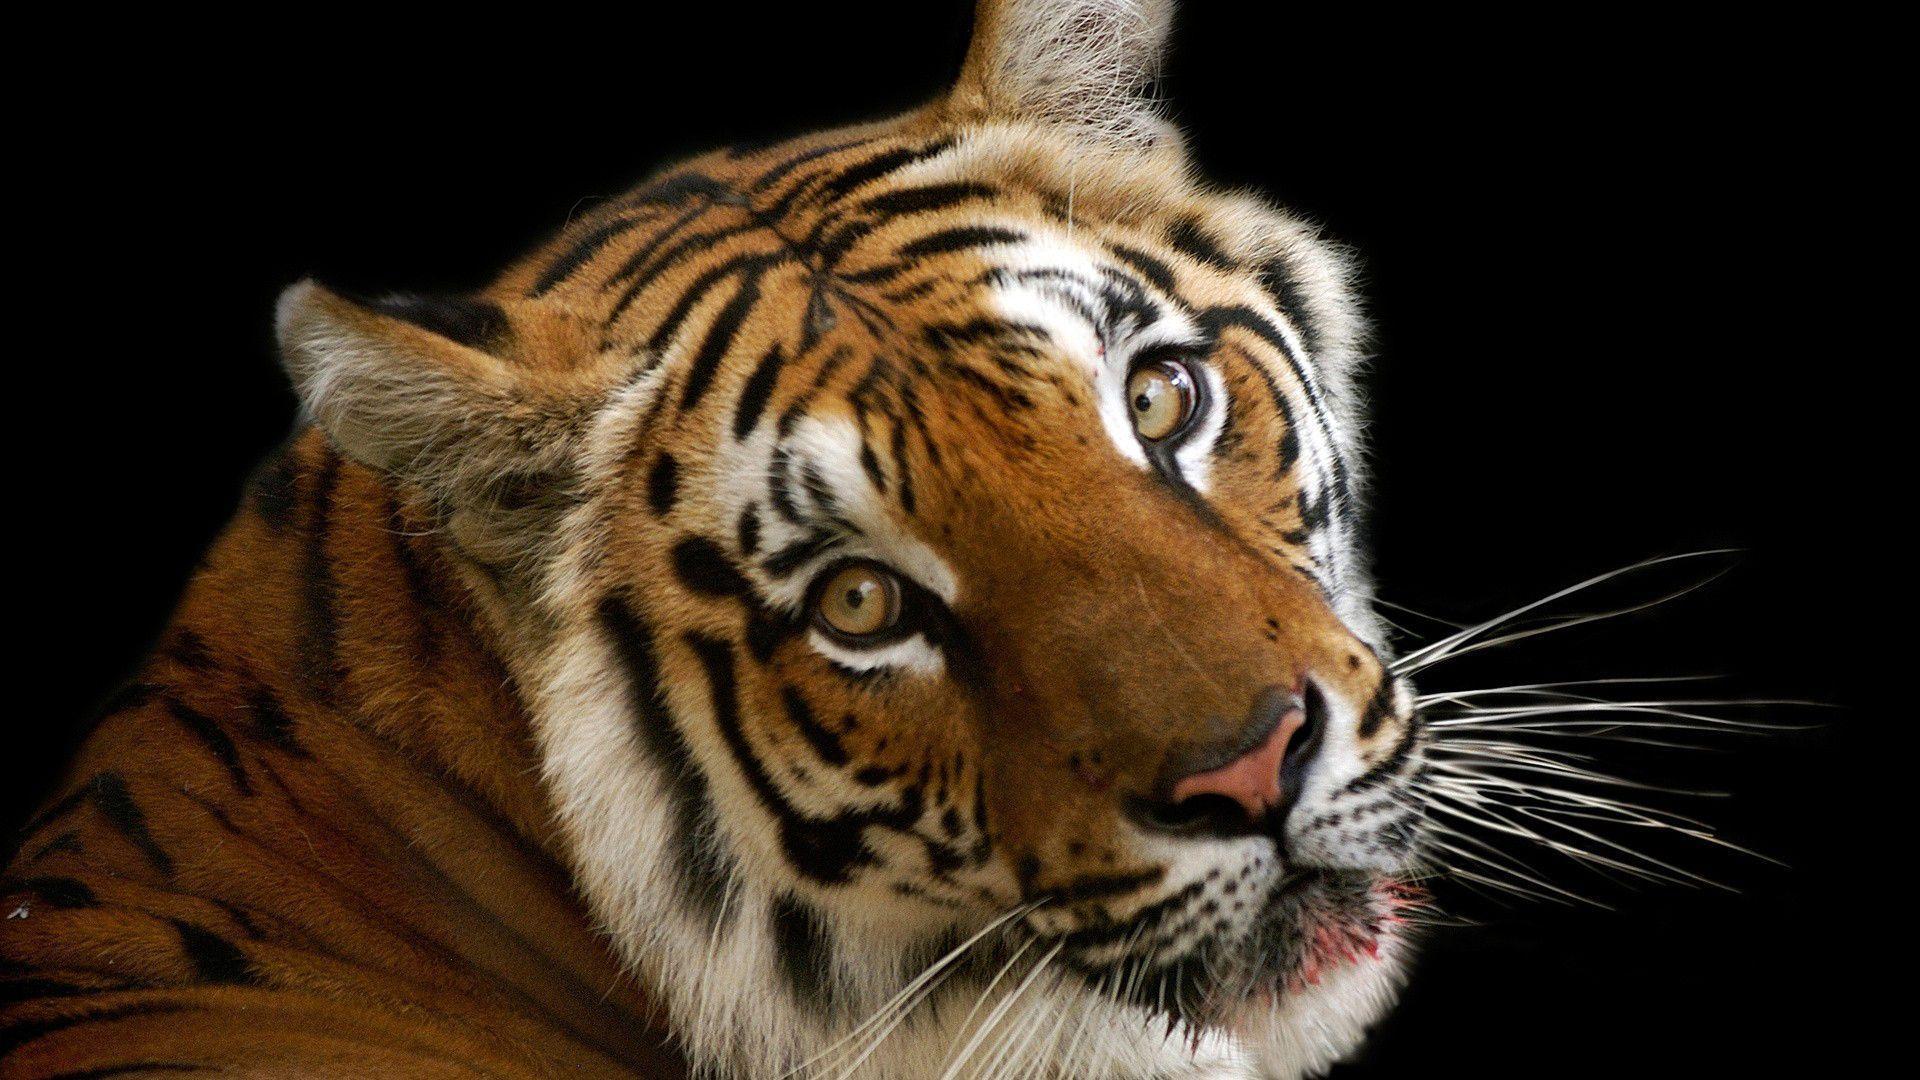 angry Tiger Face hd wallpapers download